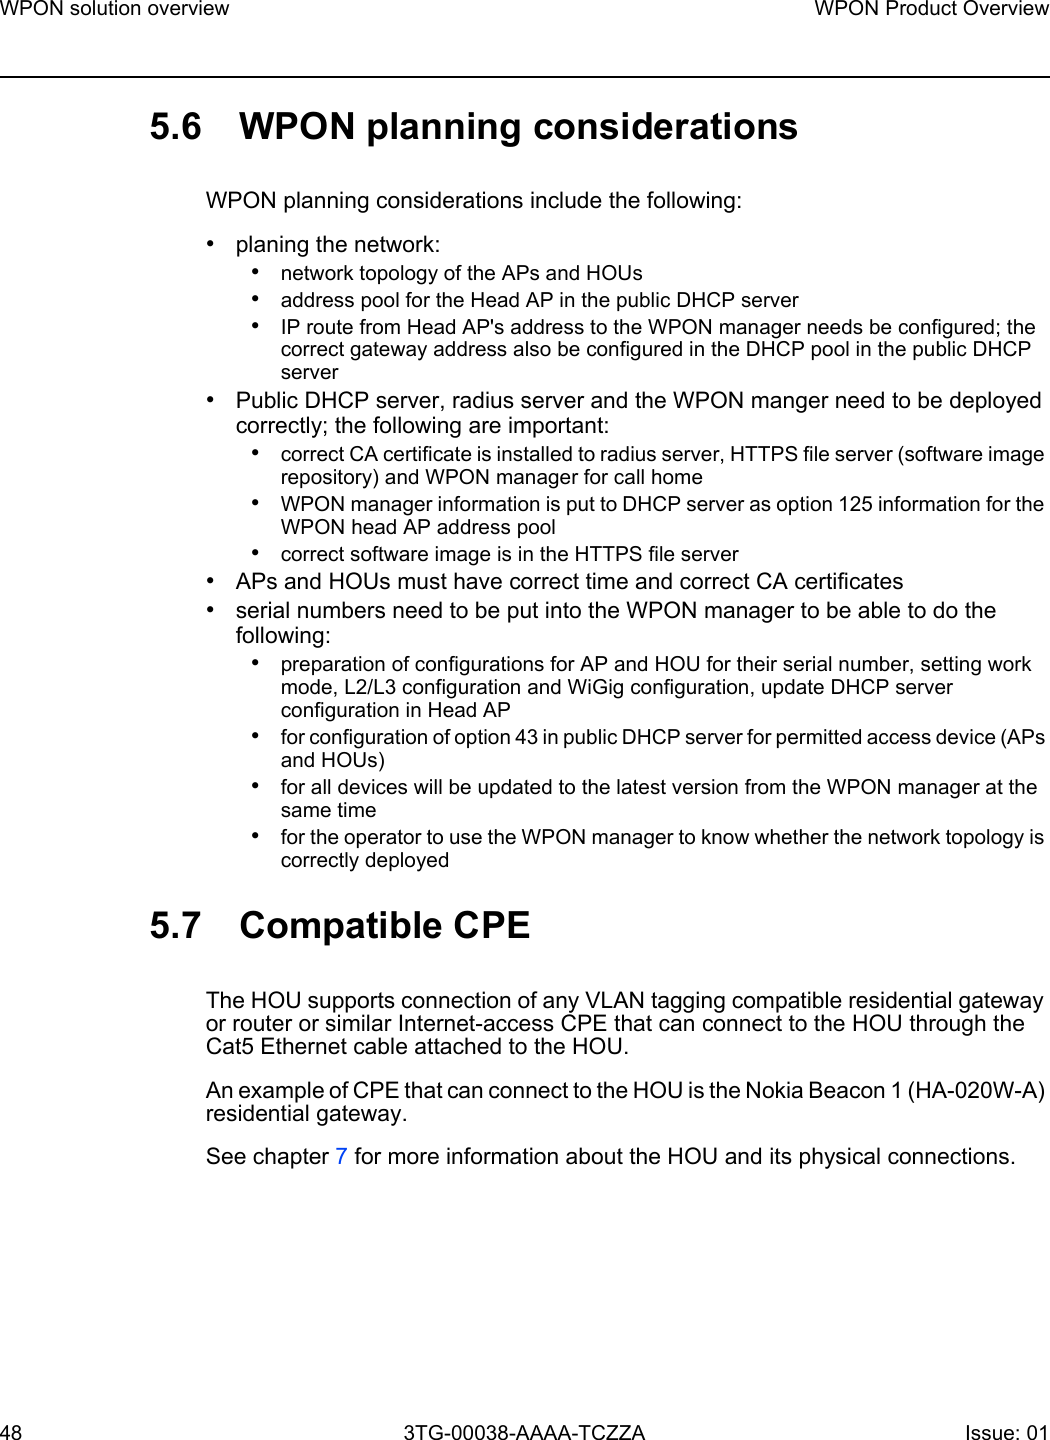 WPON solution overview48WPON Product Overview3TG-00038-AAAA-TCZZA Issue: 01 5.6 WPON planning considerationsWPON planning considerations include the following:•planing the network:•network topology of the APs and HOUs•address pool for the Head AP in the public DHCP server•IP route from Head AP&apos;s address to the WPON manager needs be configured; the correct gateway address also be configured in the DHCP pool in the public DHCP server•Public DHCP server, radius server and the WPON manger need to be deployed correctly; the following are important:•correct CA certificate is installed to radius server, HTTPS file server (software image repository) and WPON manager for call home•WPON manager information is put to DHCP server as option 125 information for the WPON head AP address pool•correct software image is in the HTTPS file server•APs and HOUs must have correct time and correct CA certificates•serial numbers need to be put into the WPON manager to be able to do the following:•preparation of configurations for AP and HOU for their serial number, setting work mode, L2/L3 configuration and WiGig configuration, update DHCP server configuration in Head AP•for configuration of option 43 in public DHCP server for permitted access device (APs and HOUs)•for all devices will be updated to the latest version from the WPON manager at the same time•for the operator to use the WPON manager to know whether the network topology is correctly deployed5.7 Compatible CPEThe HOU supports connection of any VLAN tagging compatible residential gateway or router or similar Internet-access CPE that can connect to the HOU through the Cat5 Ethernet cable attached to the HOU. An example of CPE that can connect to the HOU is the Nokia Beacon 1 (HA-020W-A) residential gateway.See chapter 7 for more information about the HOU and its physical connections.